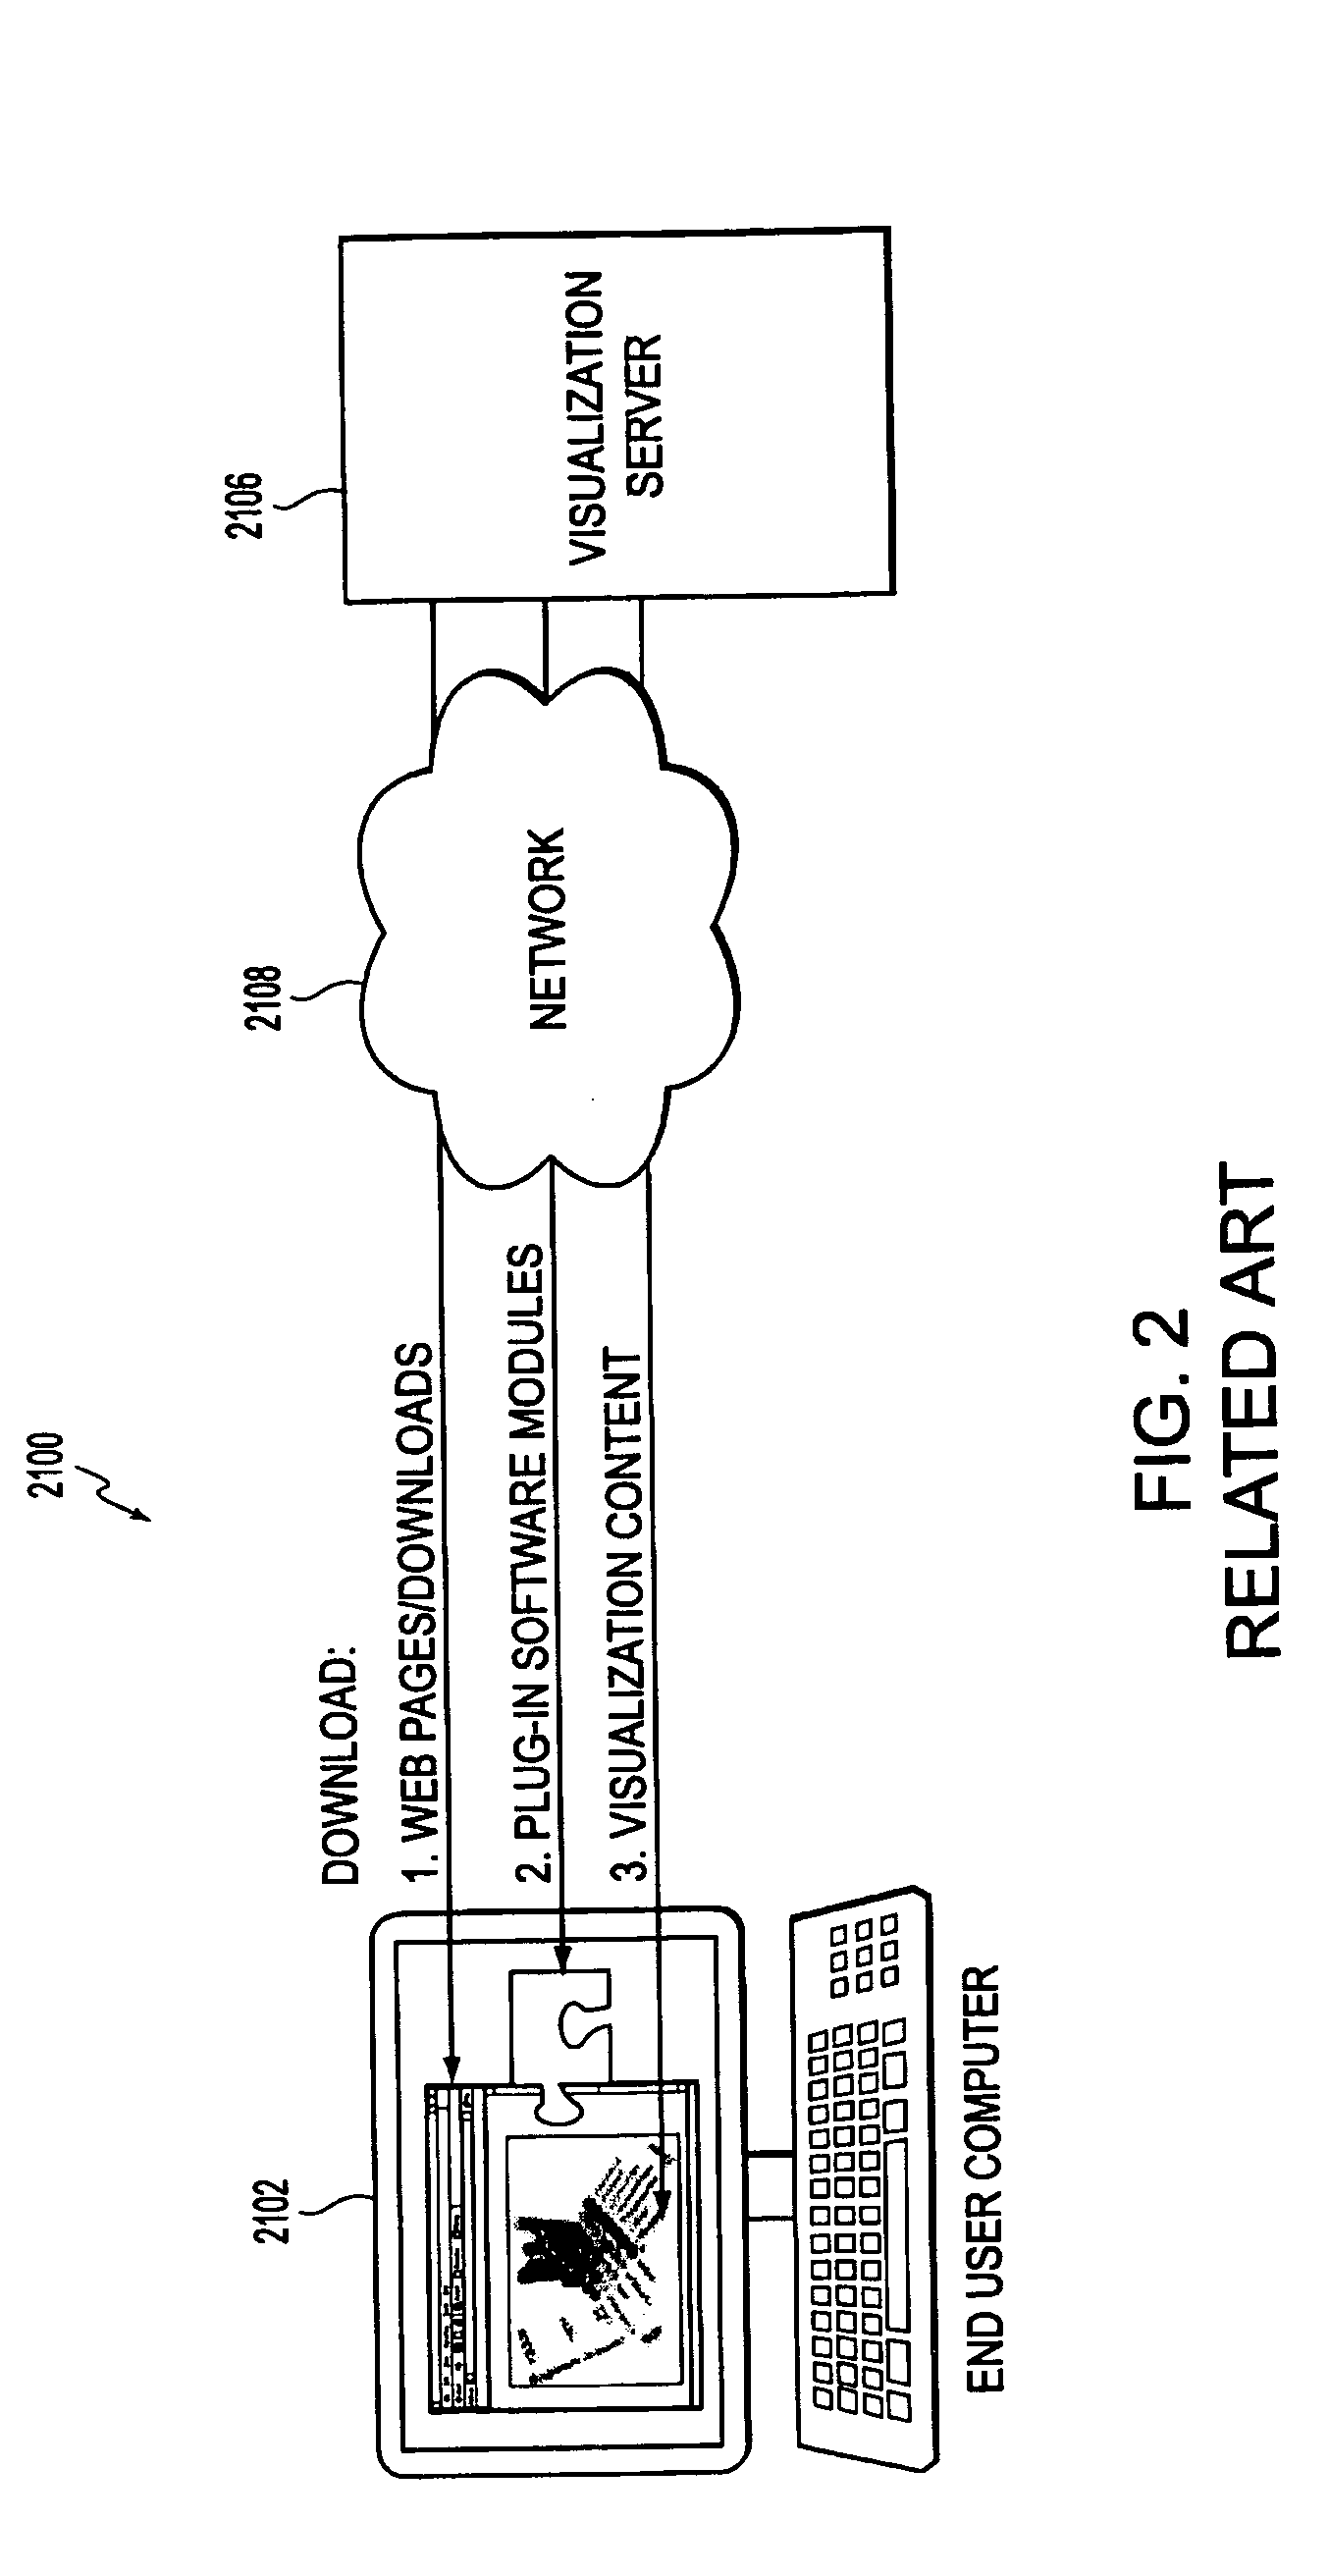 Systems and methods for enterprise-wide visualization of multi-dimensional data